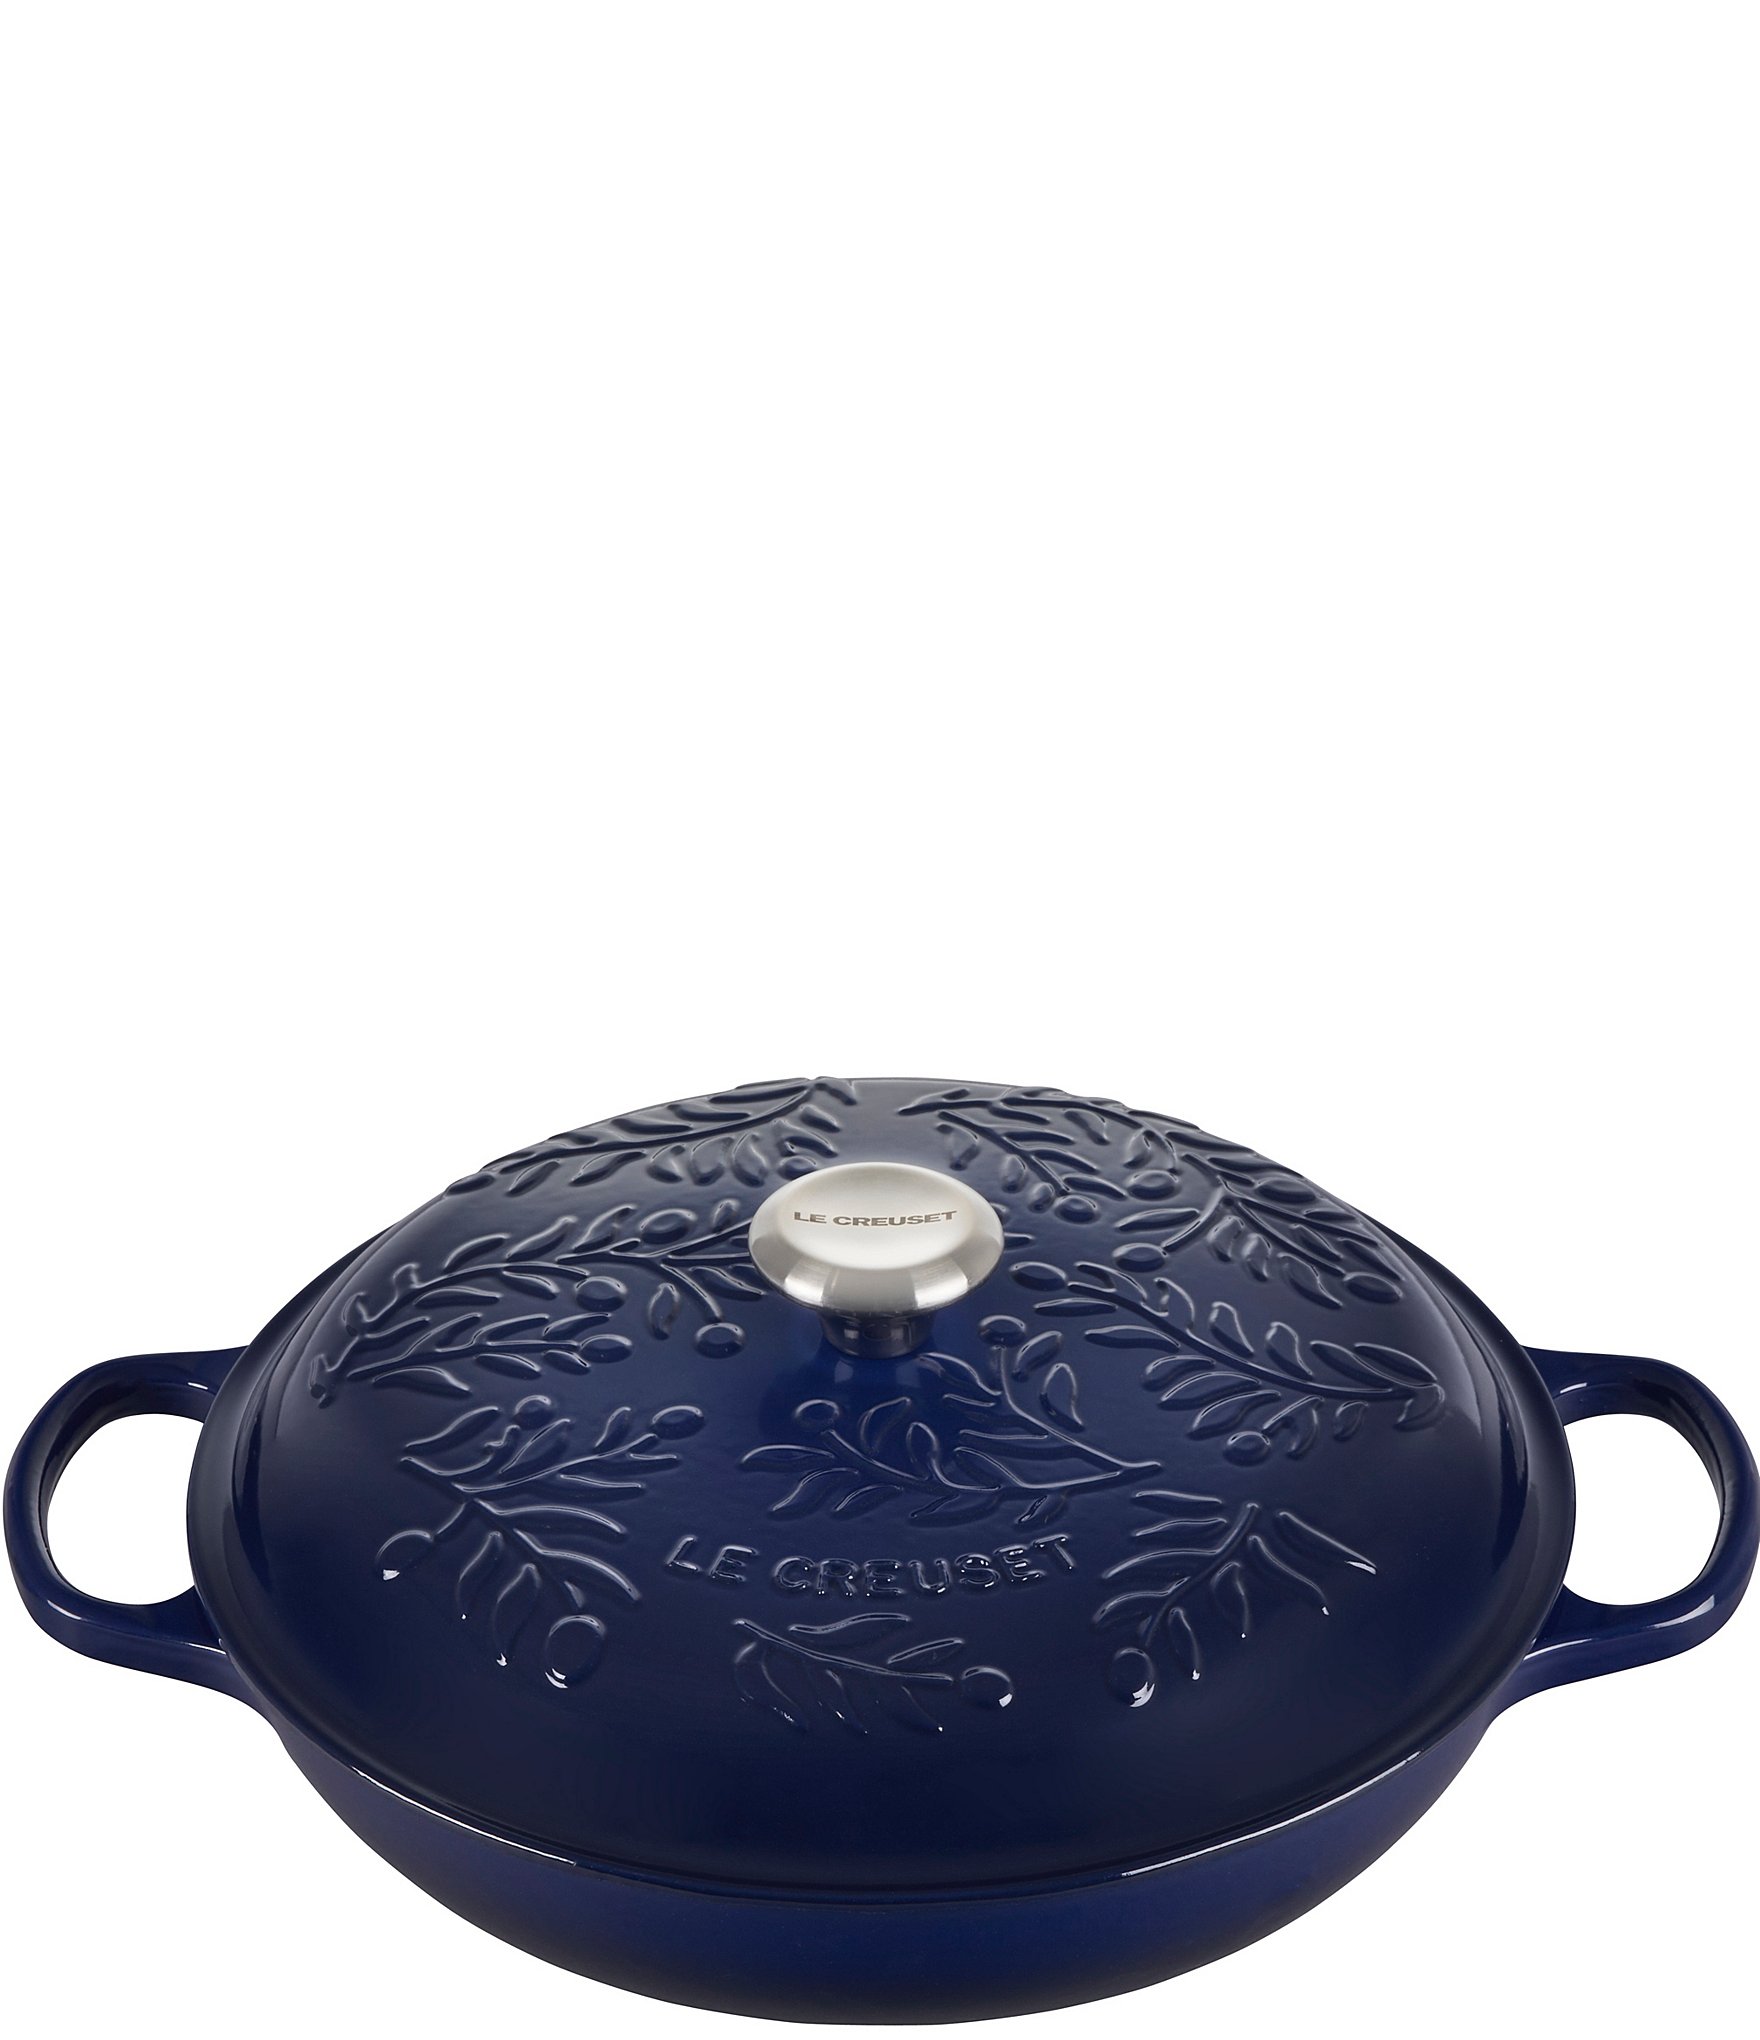 Le Creuset Enameled Cast Iron Braiser with an Olive Leaf Pattern